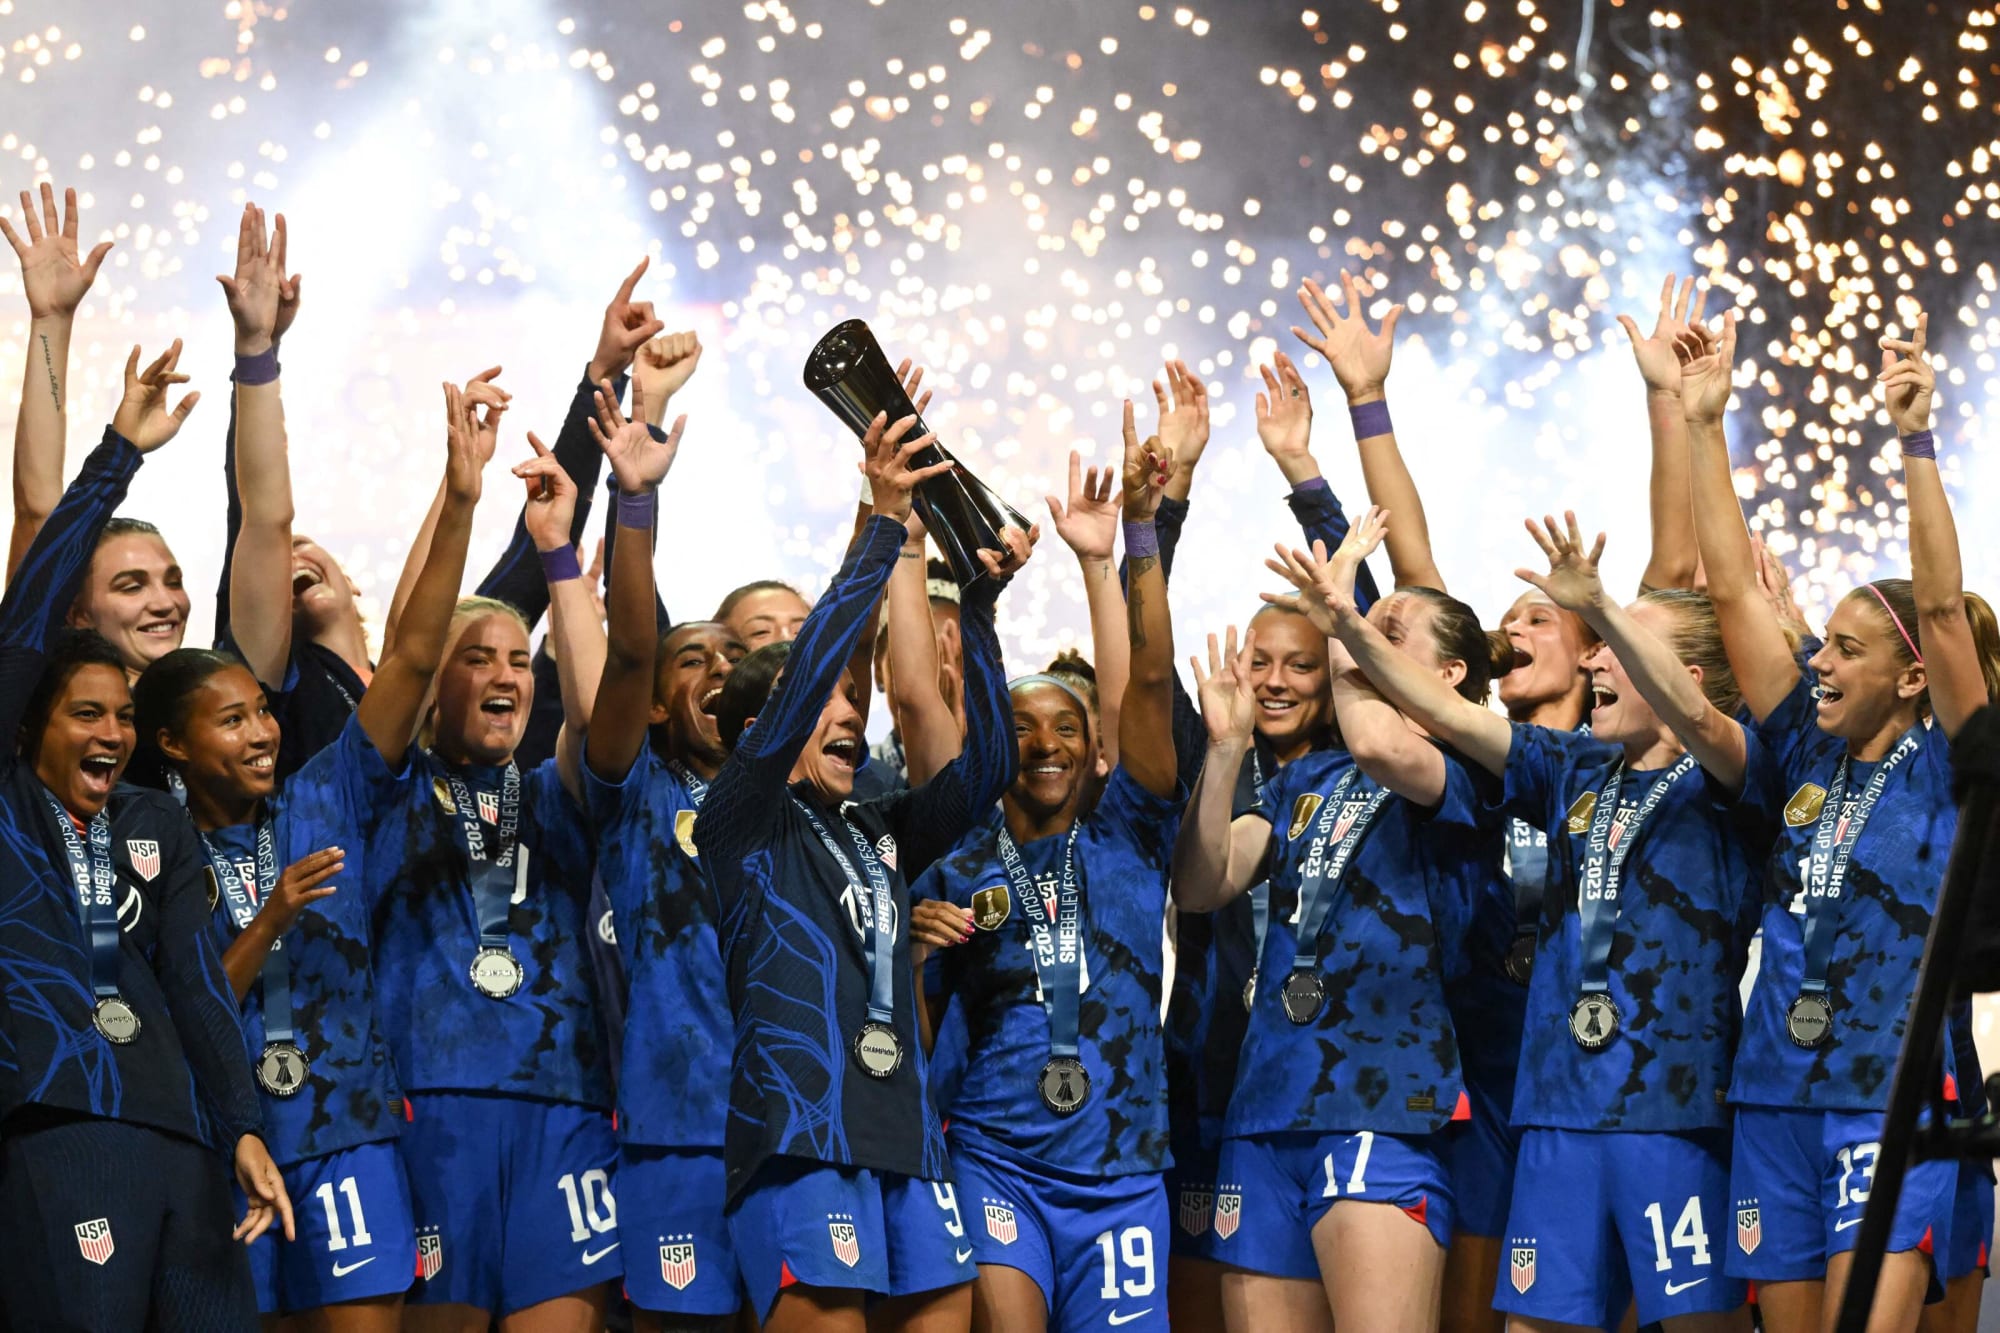 USWNT secures sixth SheBelieves Cup trophy ahead of World Cup